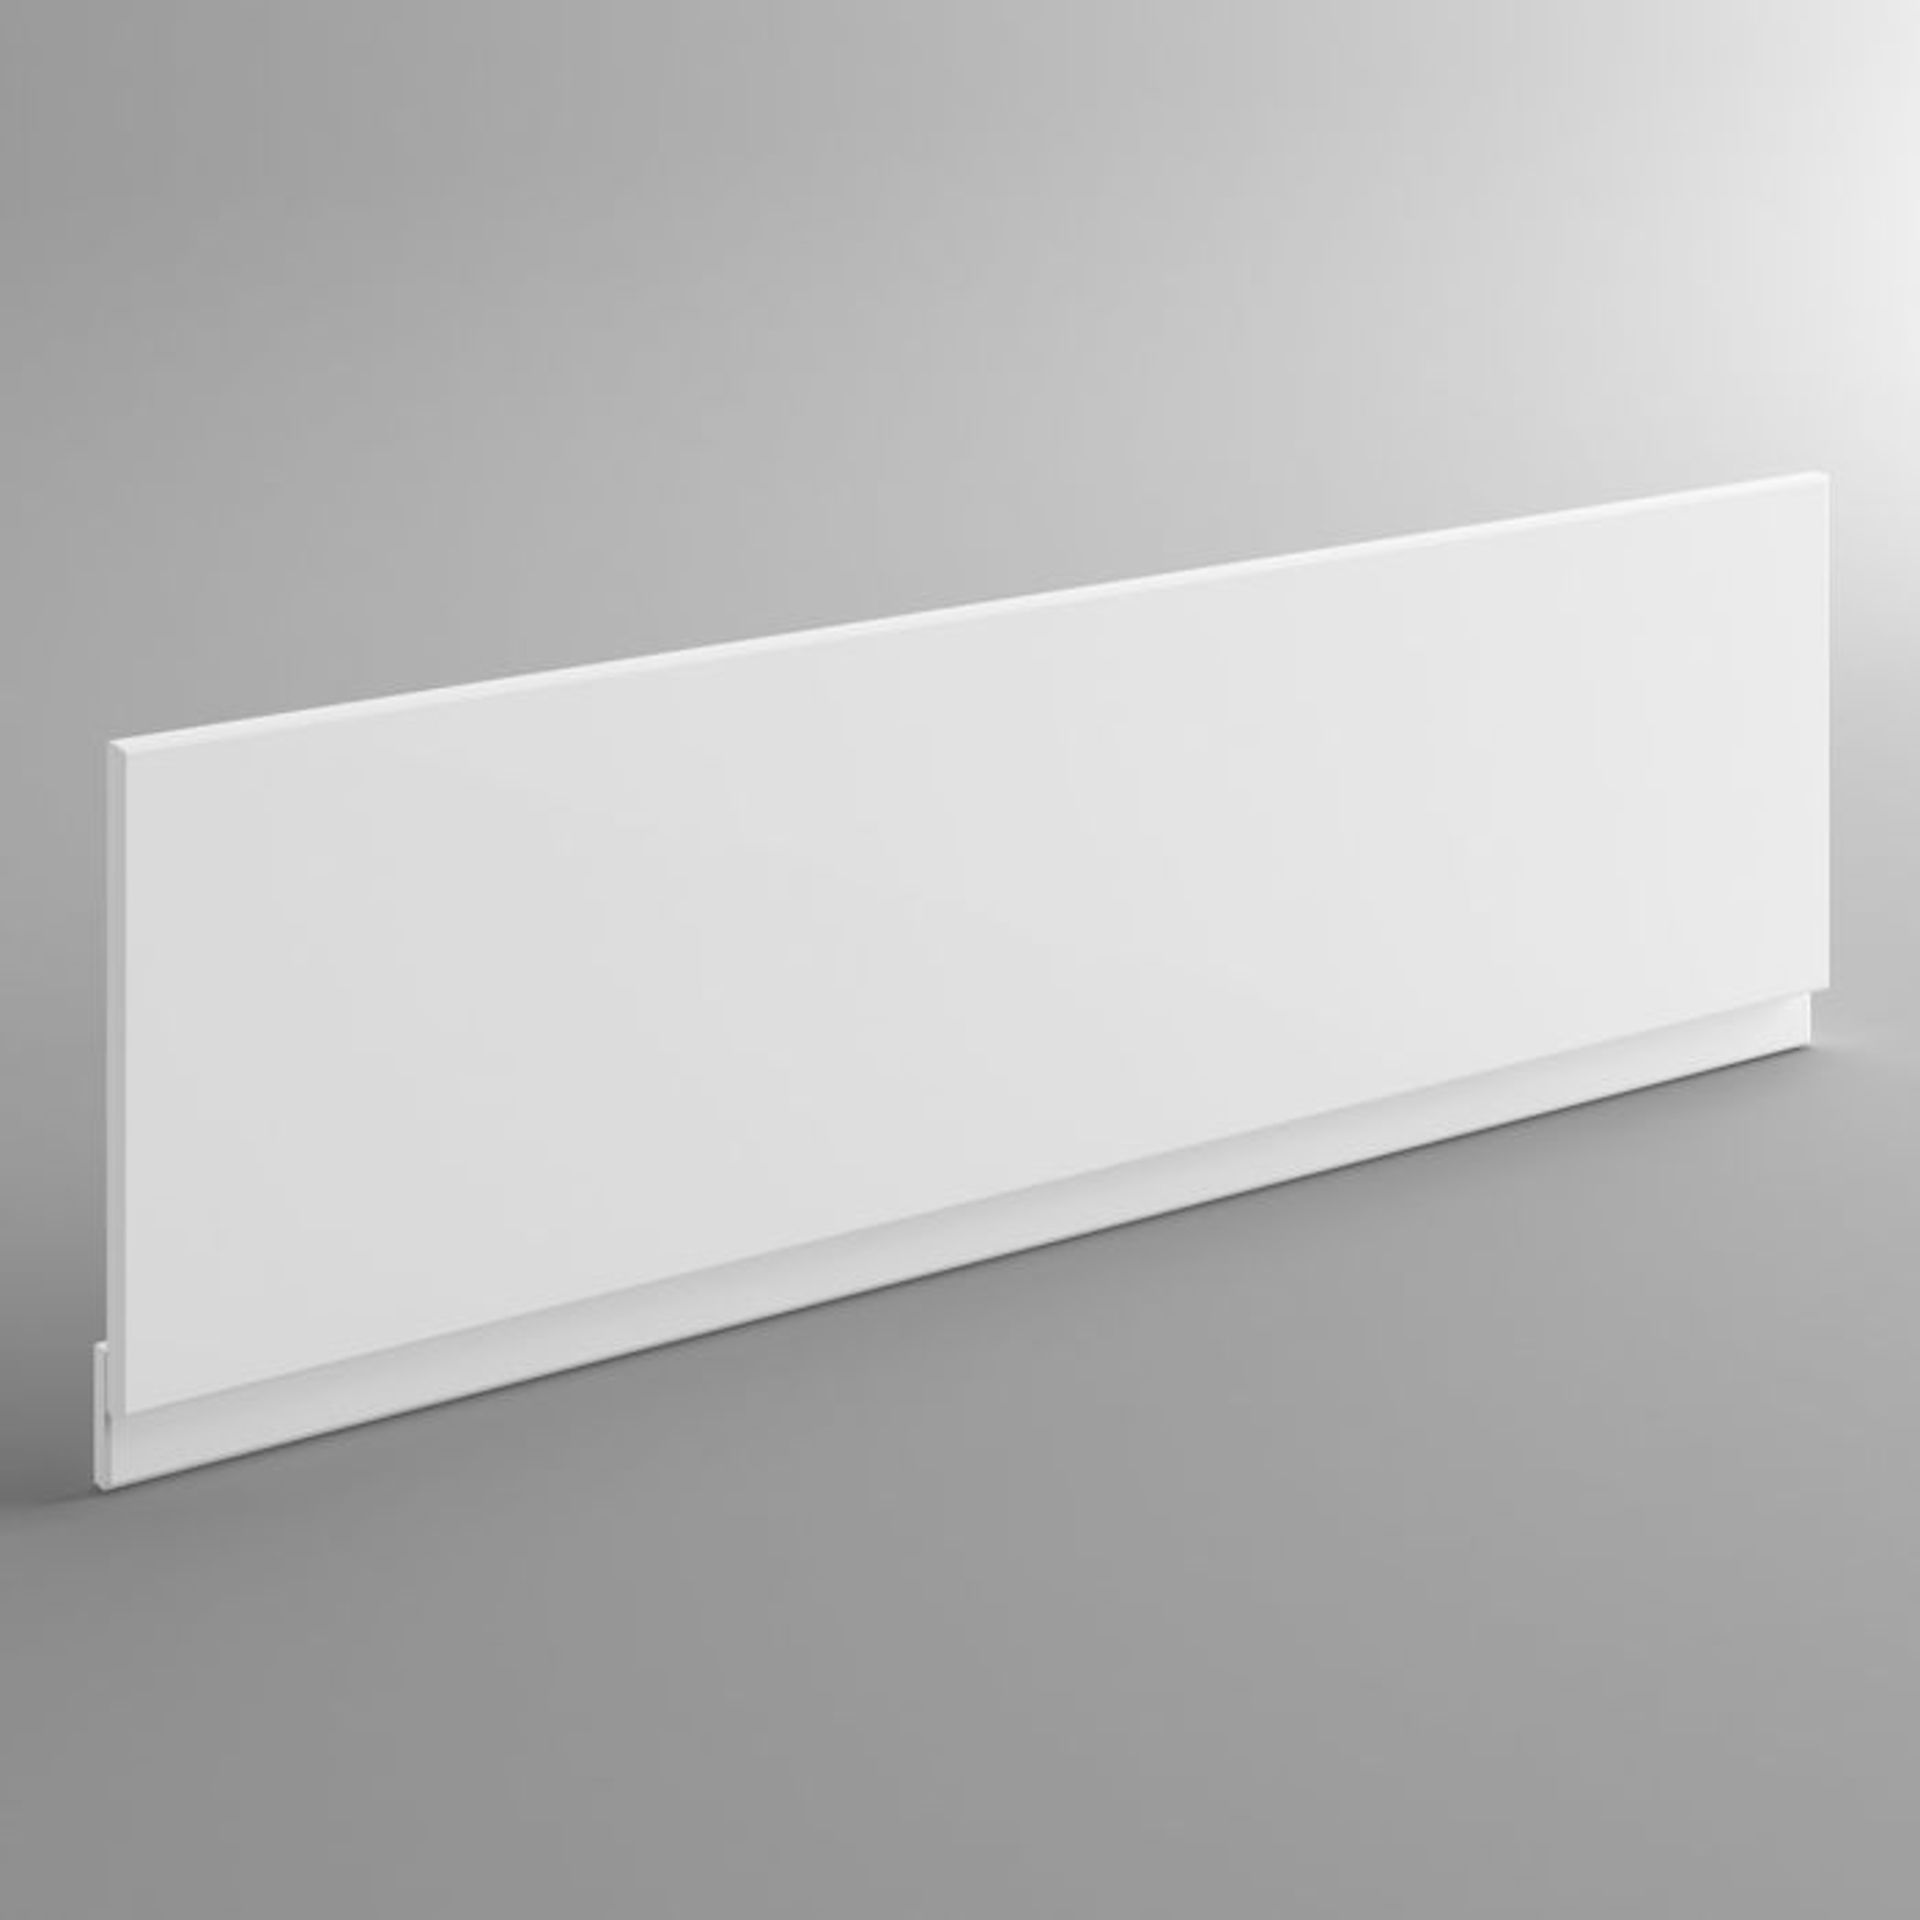 (S190) 1700mm MDF Bath Front Panel - Gloss White. RRP £79.99. 18mm thick durable MDF board - Image 2 of 2